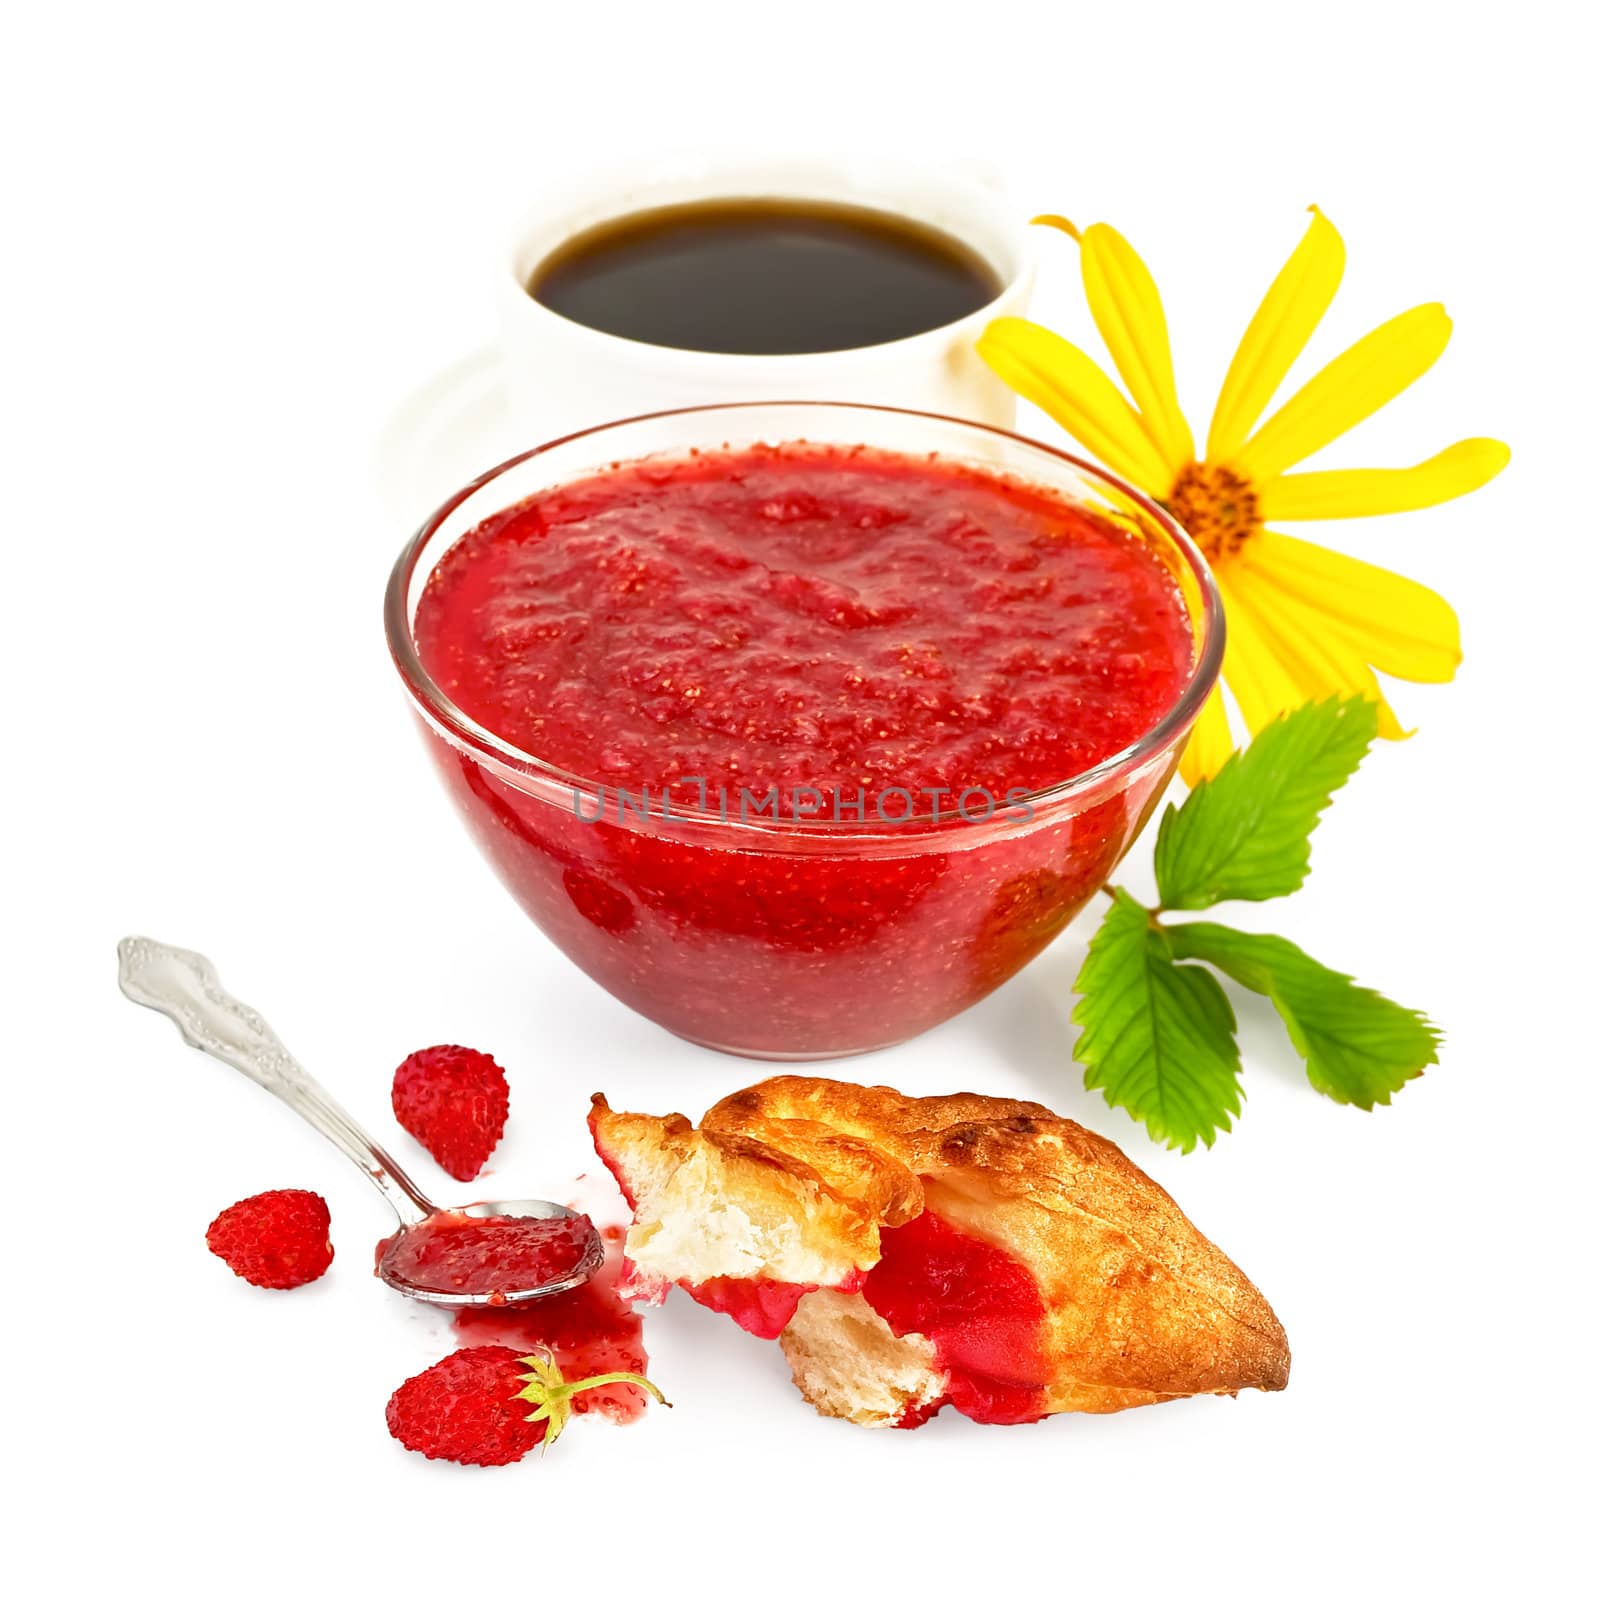 Strawberry jam in a glass bowl, a spoon, three strawberries, green leaves, yellow flowers and white porcelain cup of coffee isolated on white background